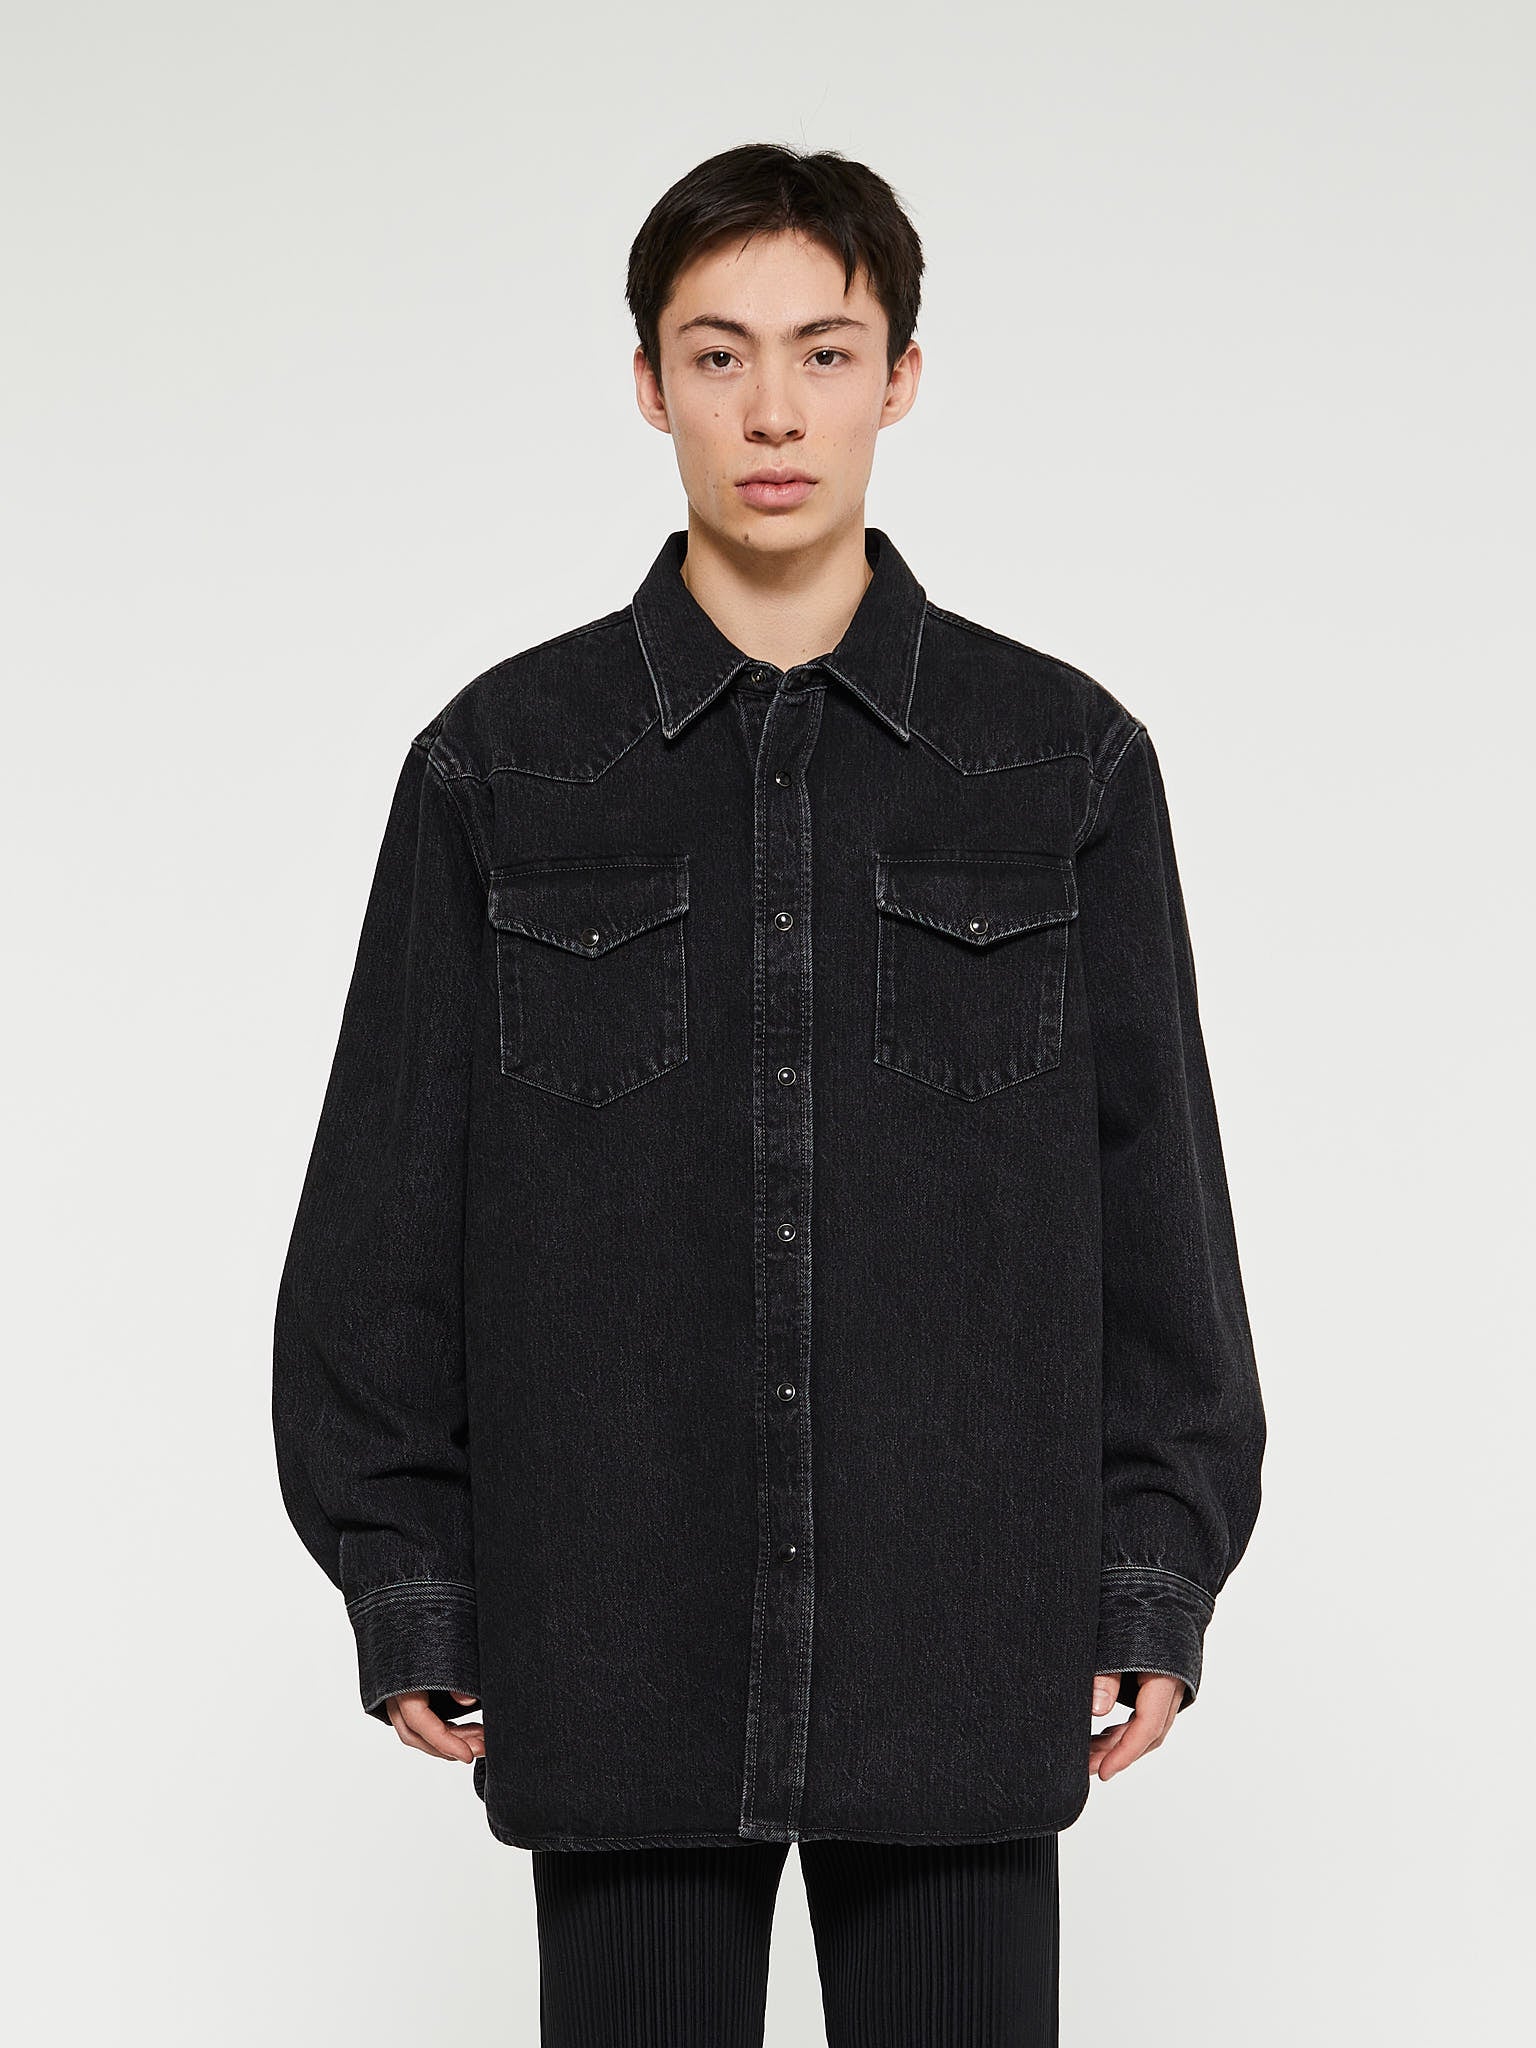 Acne Studios | Shop new arrivals from Acne Studios at stoy – Tag